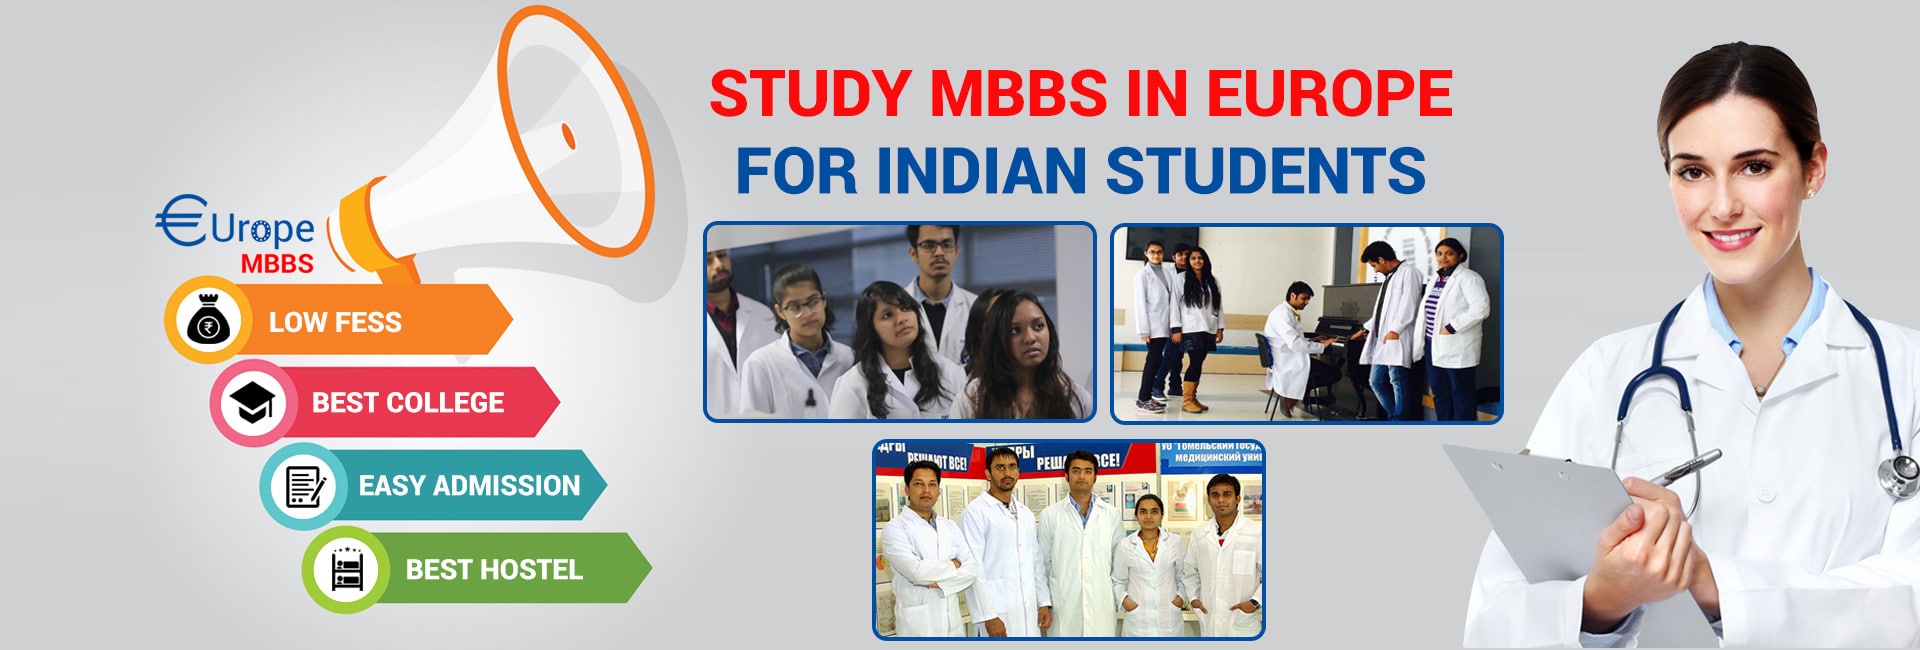 MBBS in Europe, Study MBBS in Europe for Indian Students